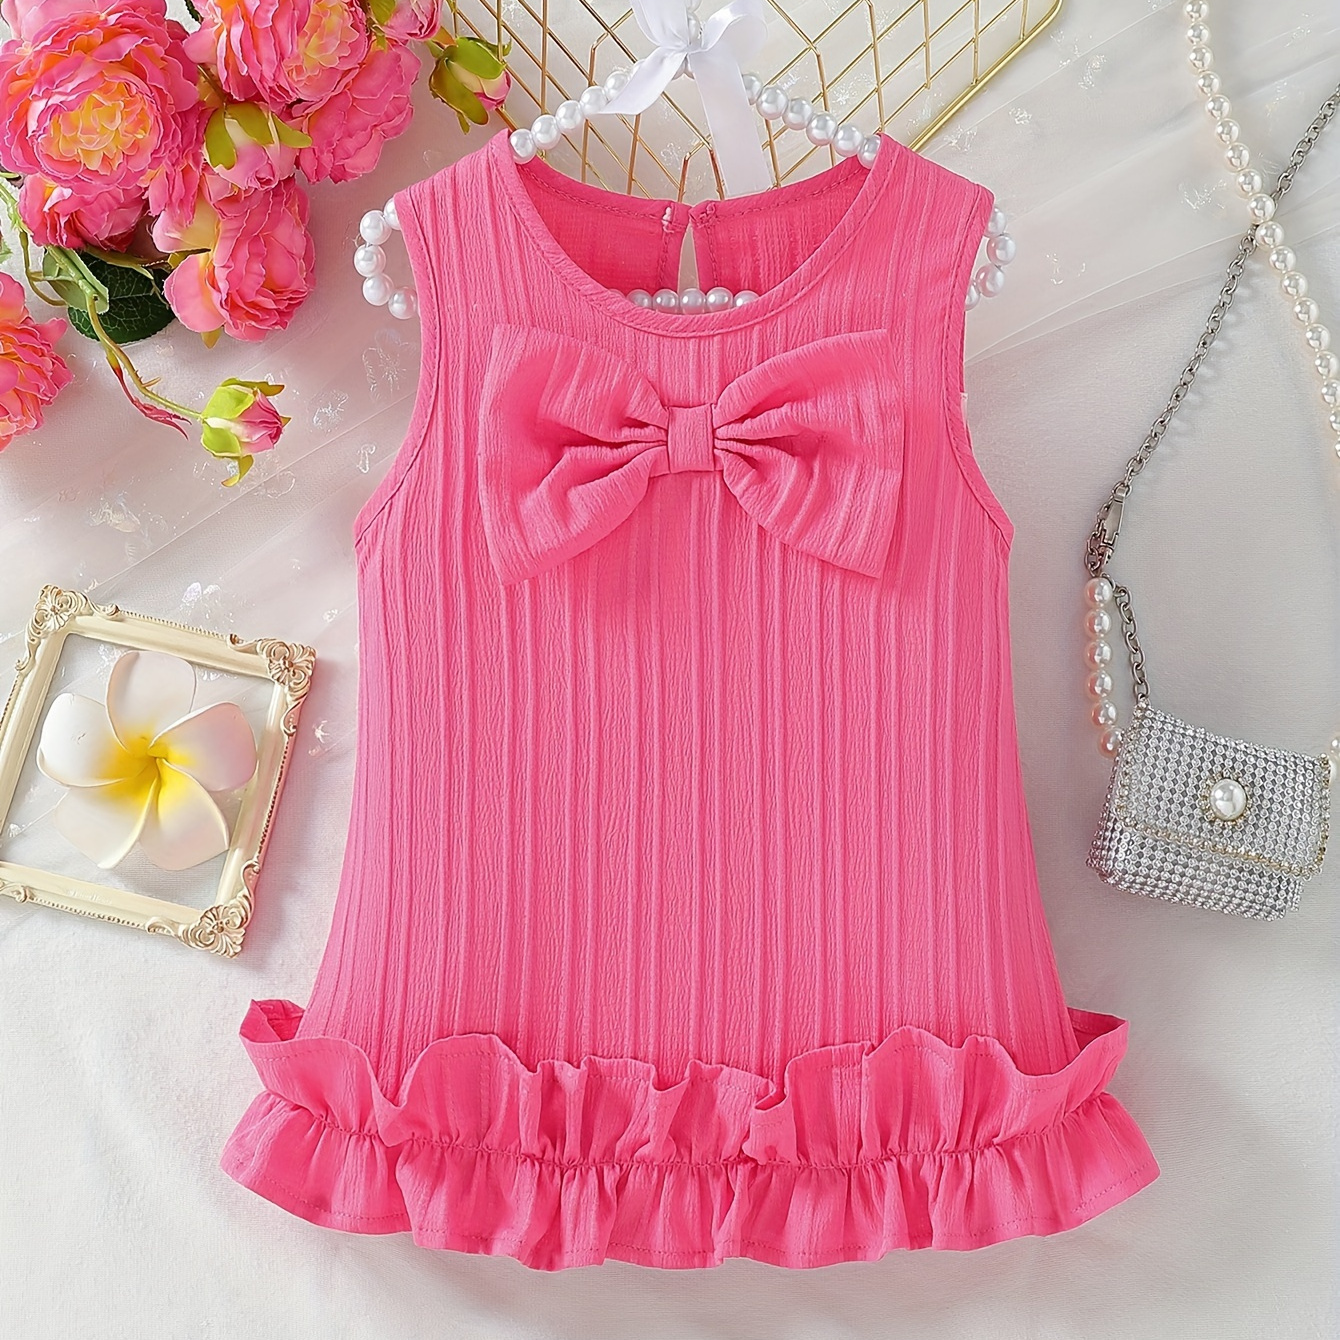 

Infant & Toddler's Bowknot Decor Solid Color Dress, Ruffle Trim Textured Sleeveless Dress, Baby Girl's Clothing For Summer/spring